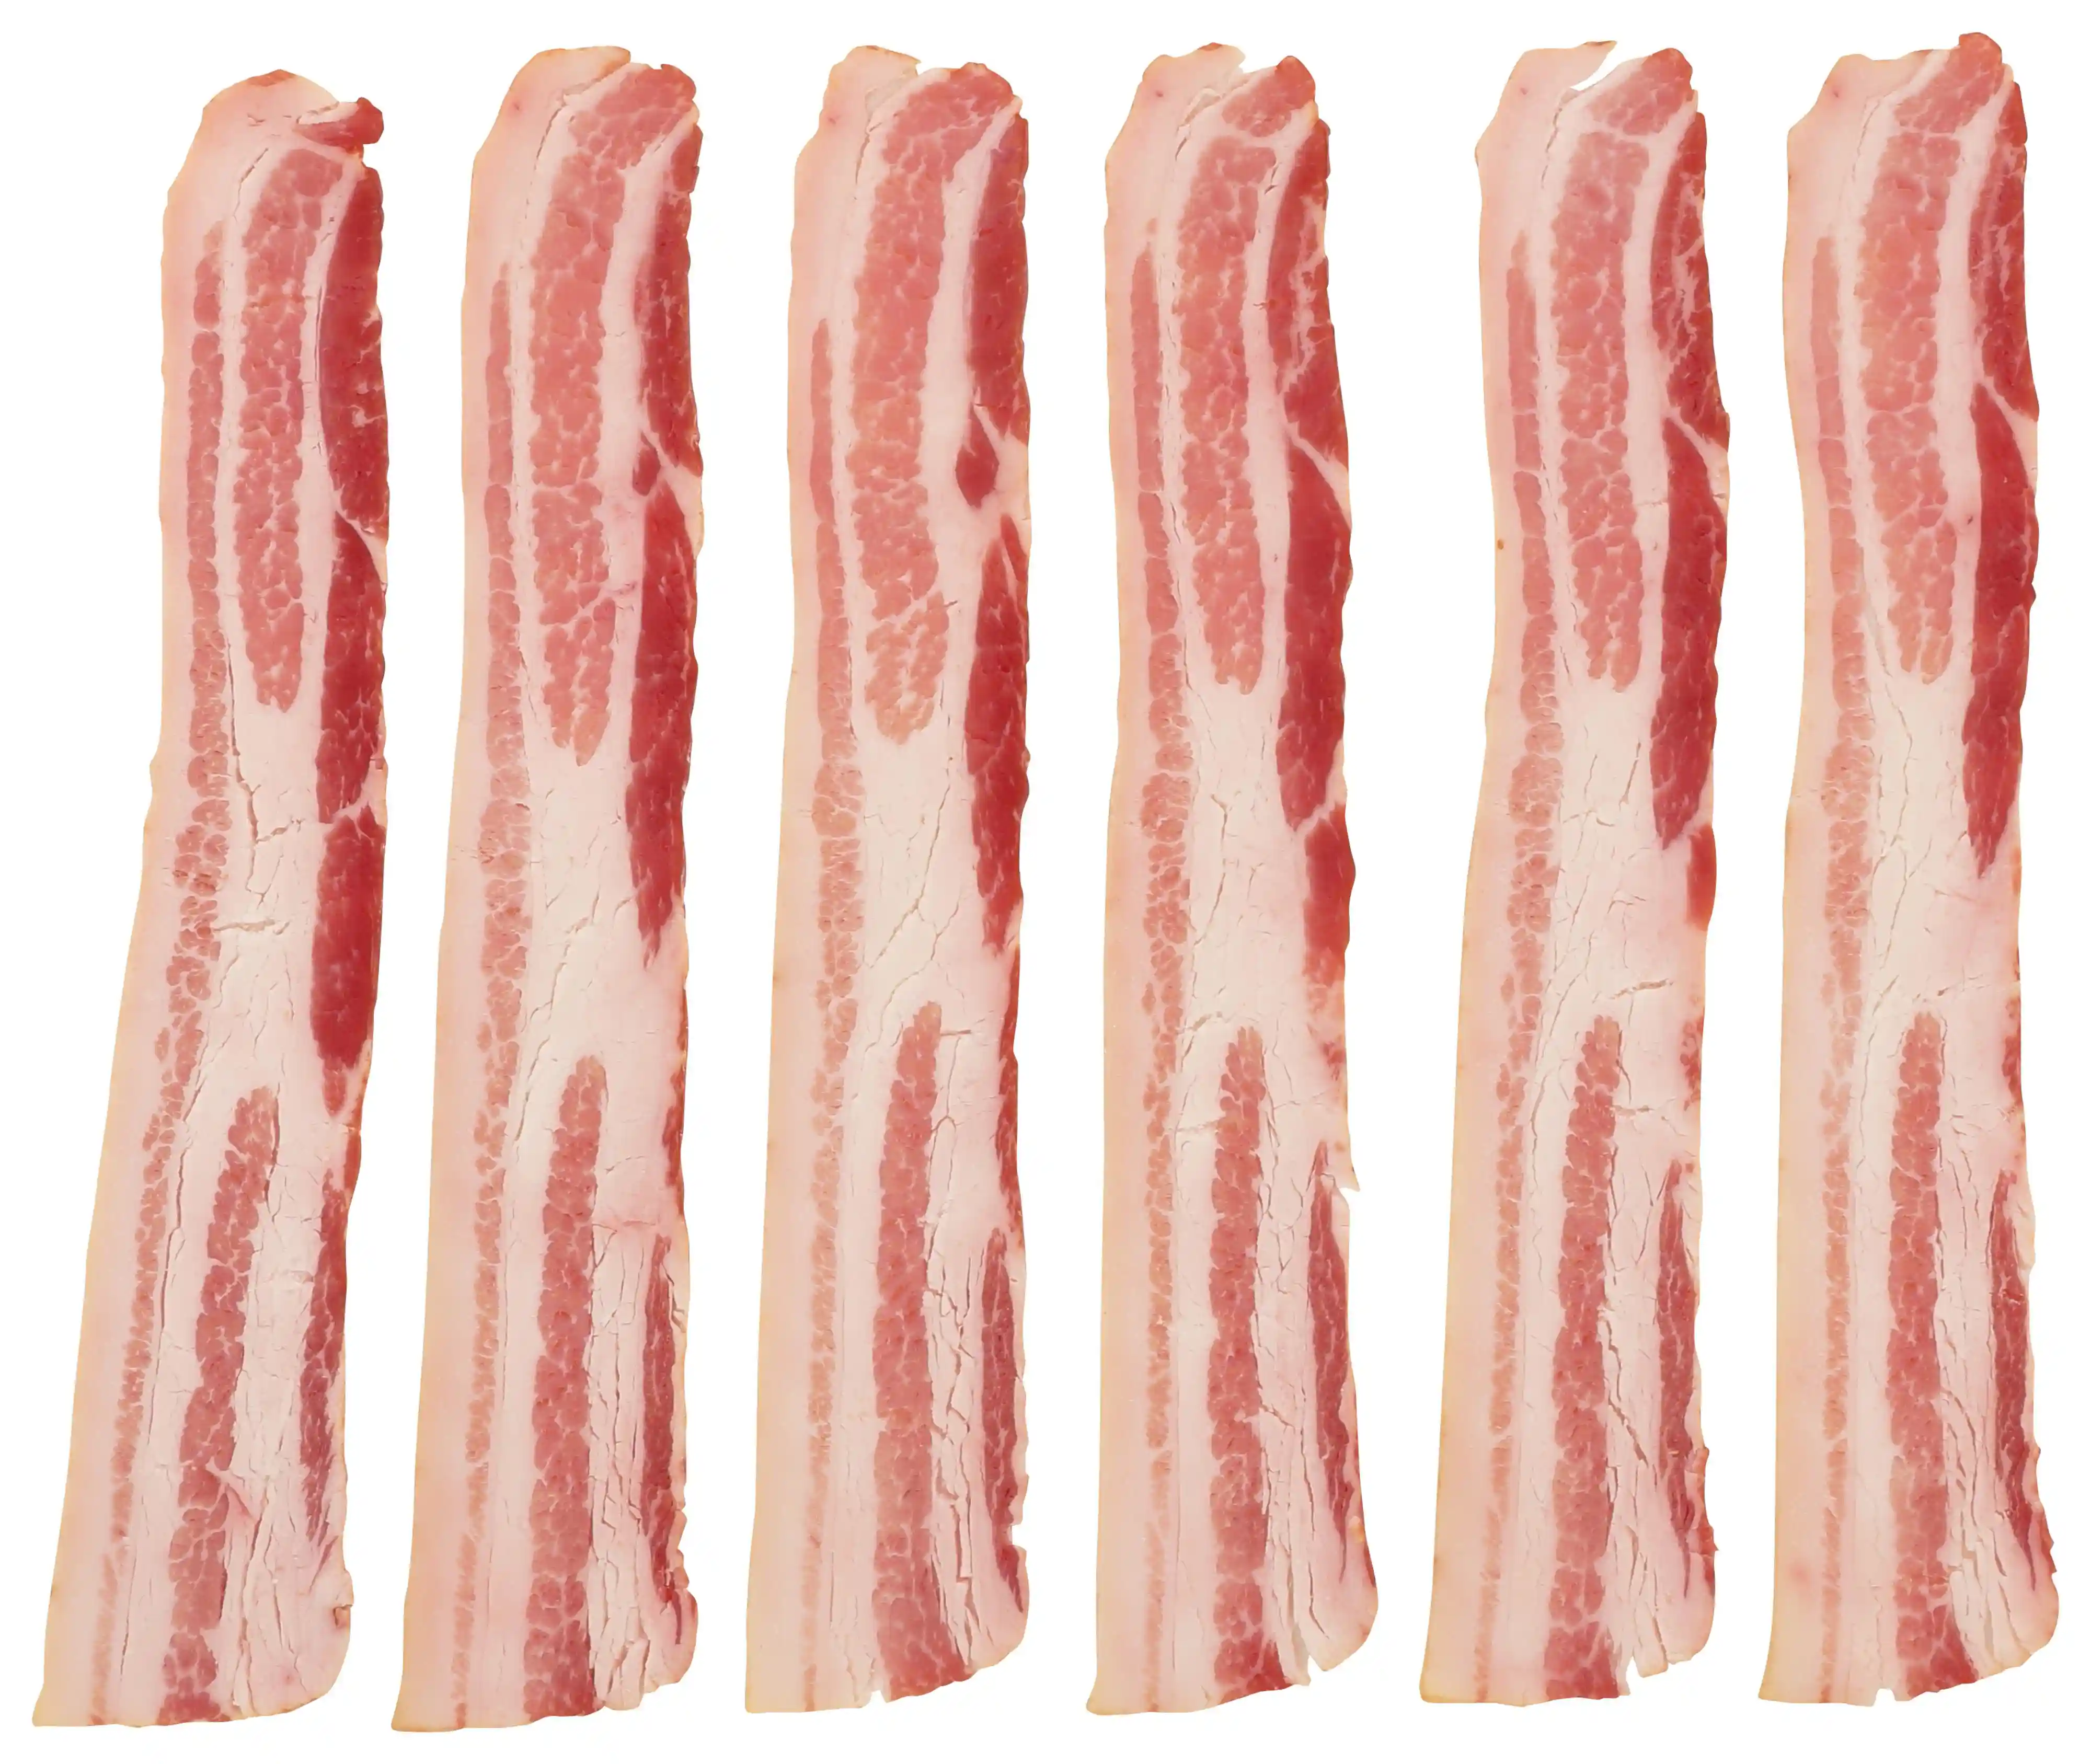 Wright® Brand Naturally Applewood Smoked Thick Sliced Bacon, Flat-Pack®, 15 Lbs, 10-14 Slices per Pound, Gas Flushed_image_21